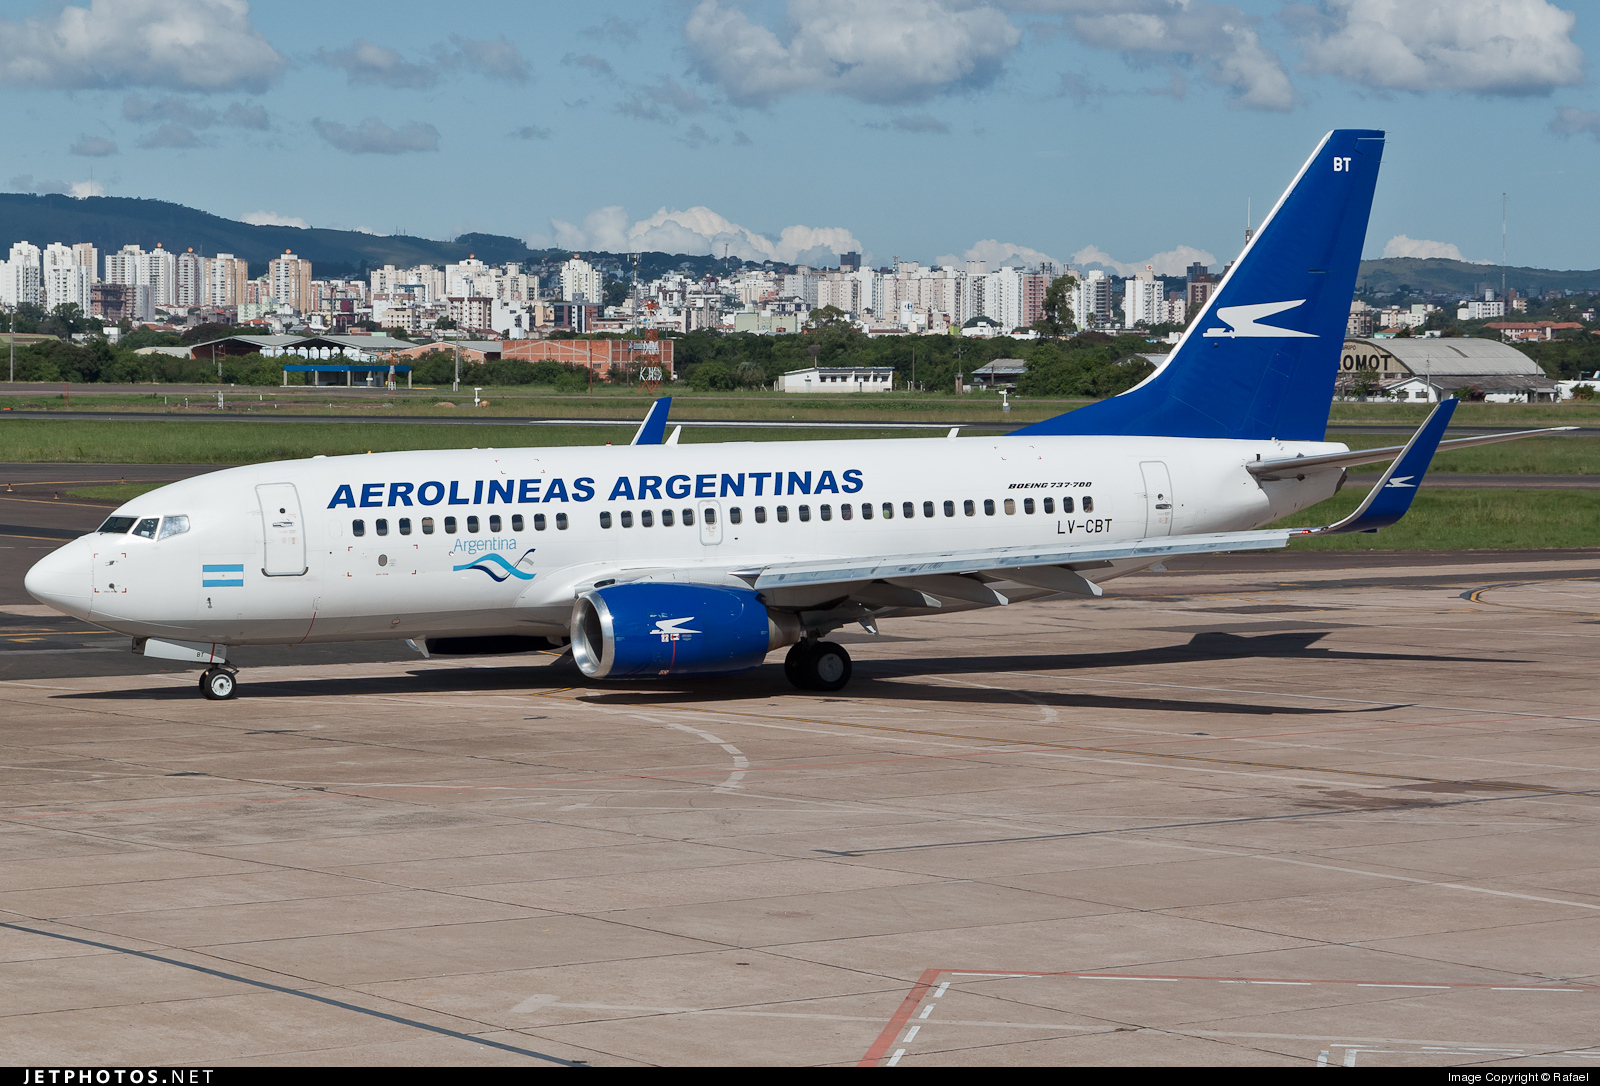 boeing 737 cbt download free